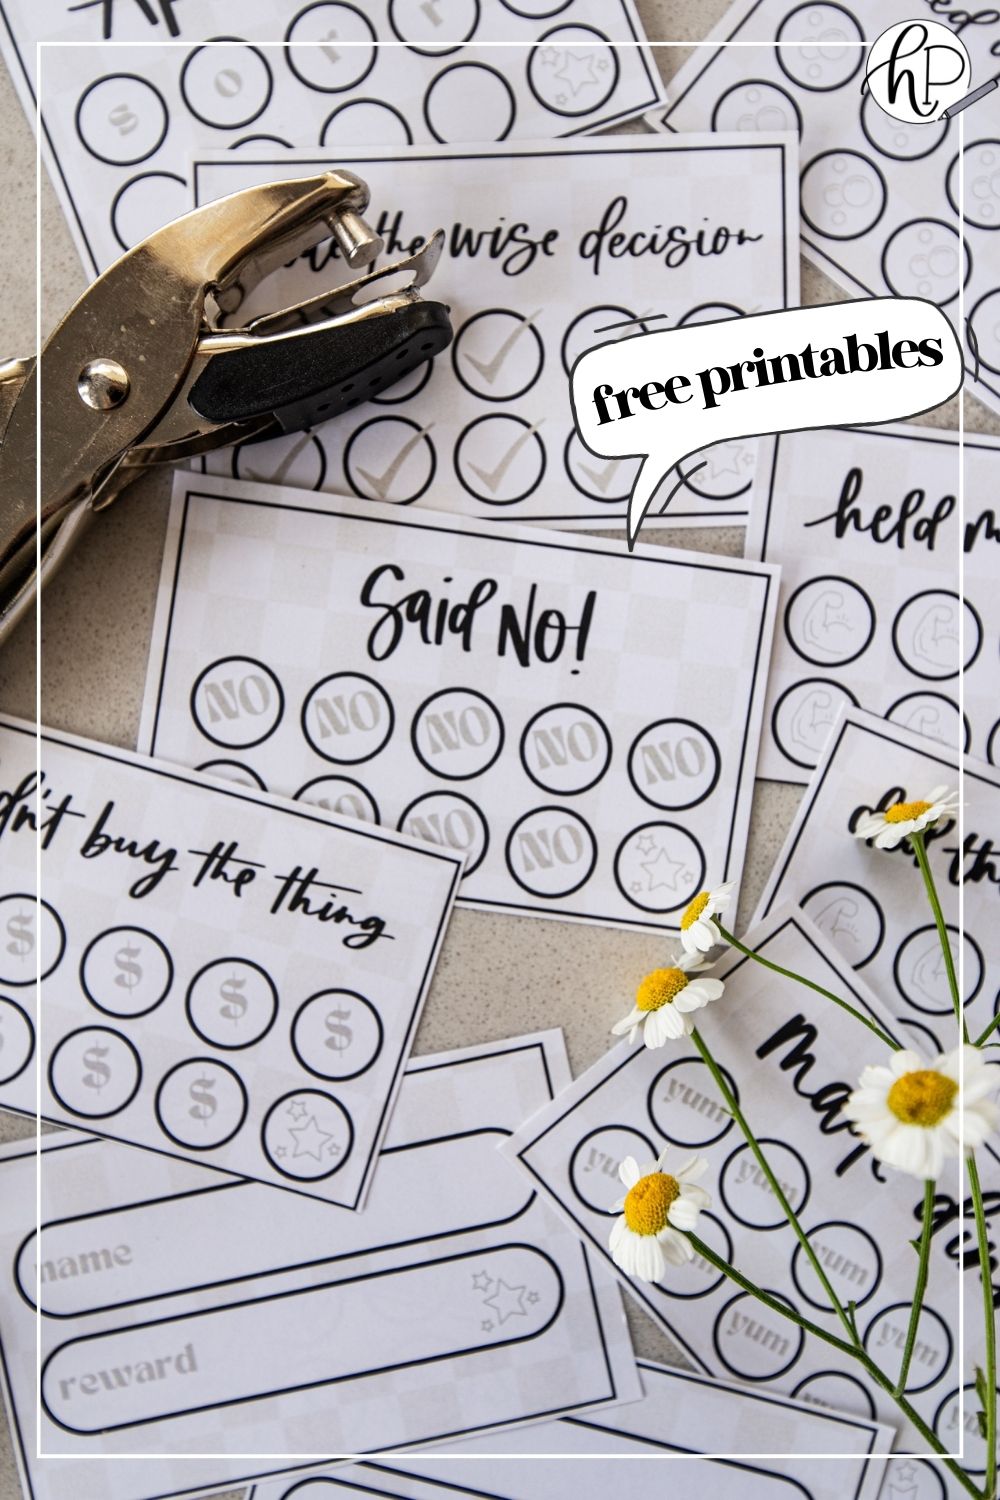 image of printed punch cards for adults, cut to size on countertop with hole punch and cut flowers punch cards have a soft checkerboard background with hand lettered goals like 'said no!', 'didn't buy the thing' and 'made the wise decision' text bubble reads 'free printables'